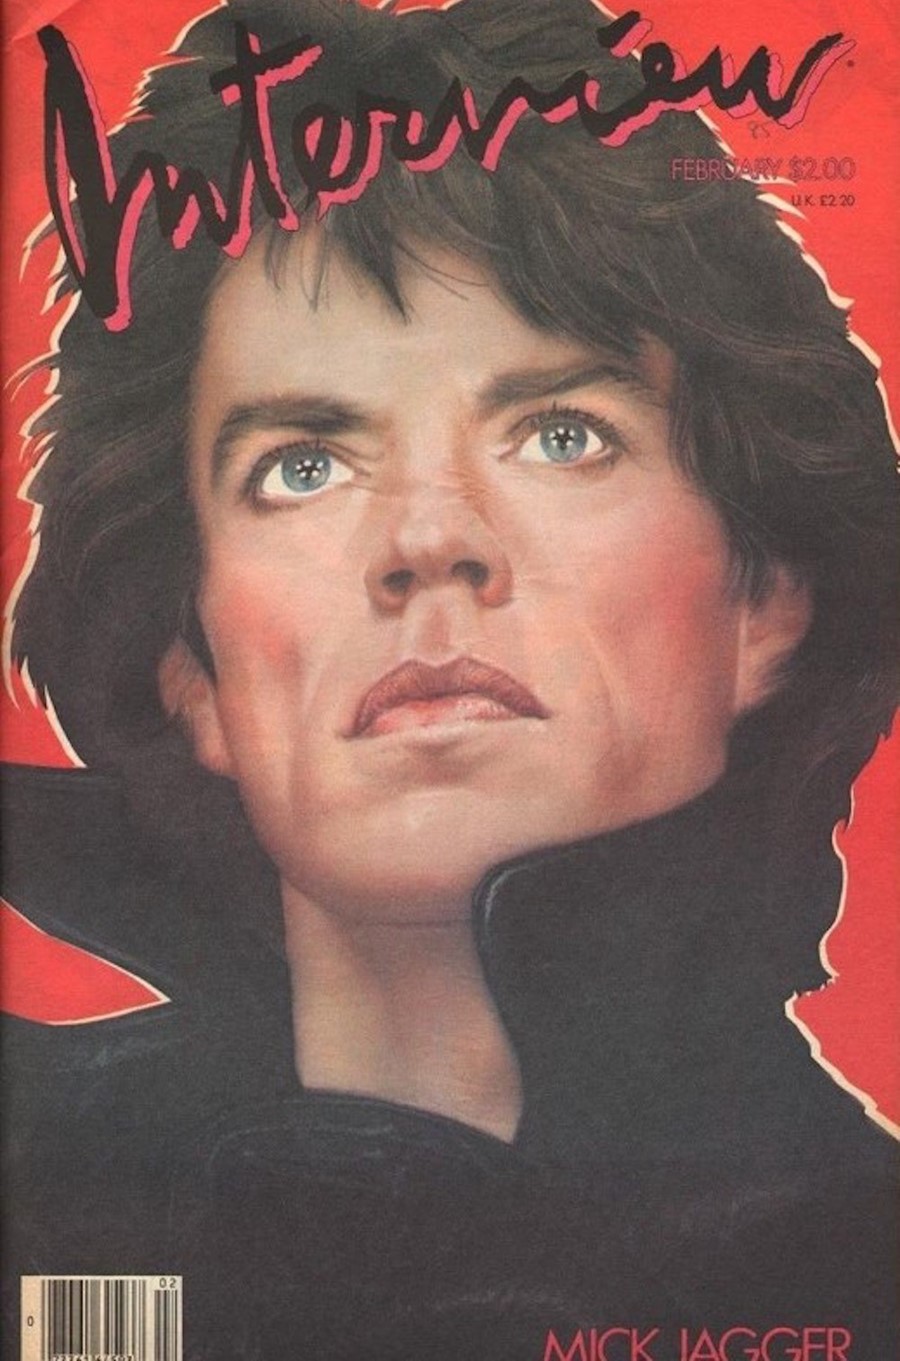 Mick Jagger on the cover of Interview magazine